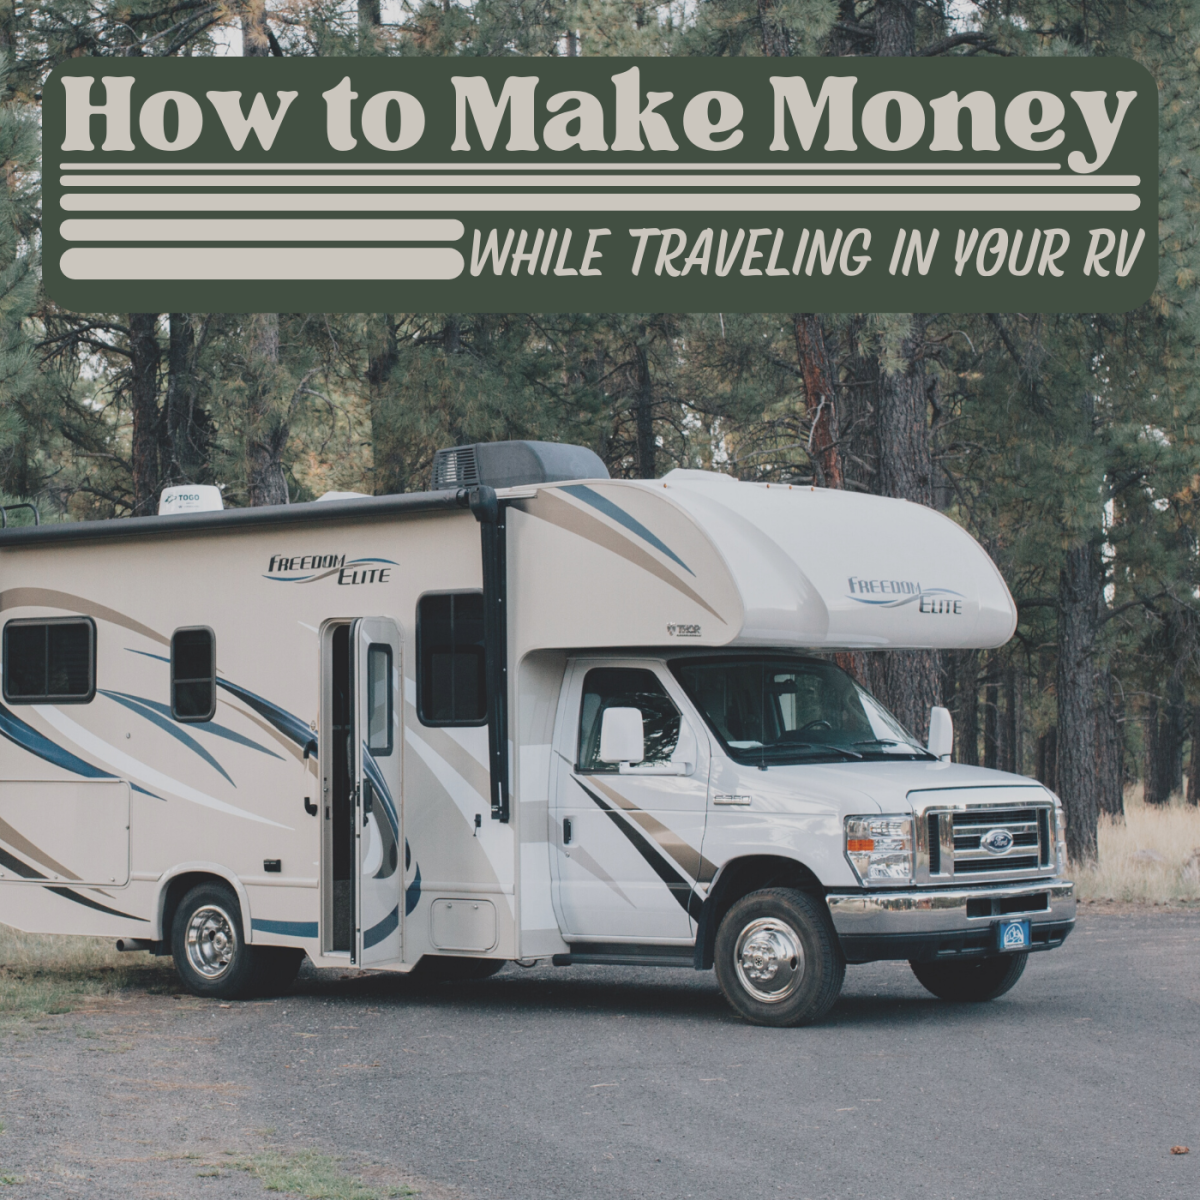 The last thing you want is to run out of retirement savings while traveling in your RV—start a side hustle so you can earn back some of what you spend. 